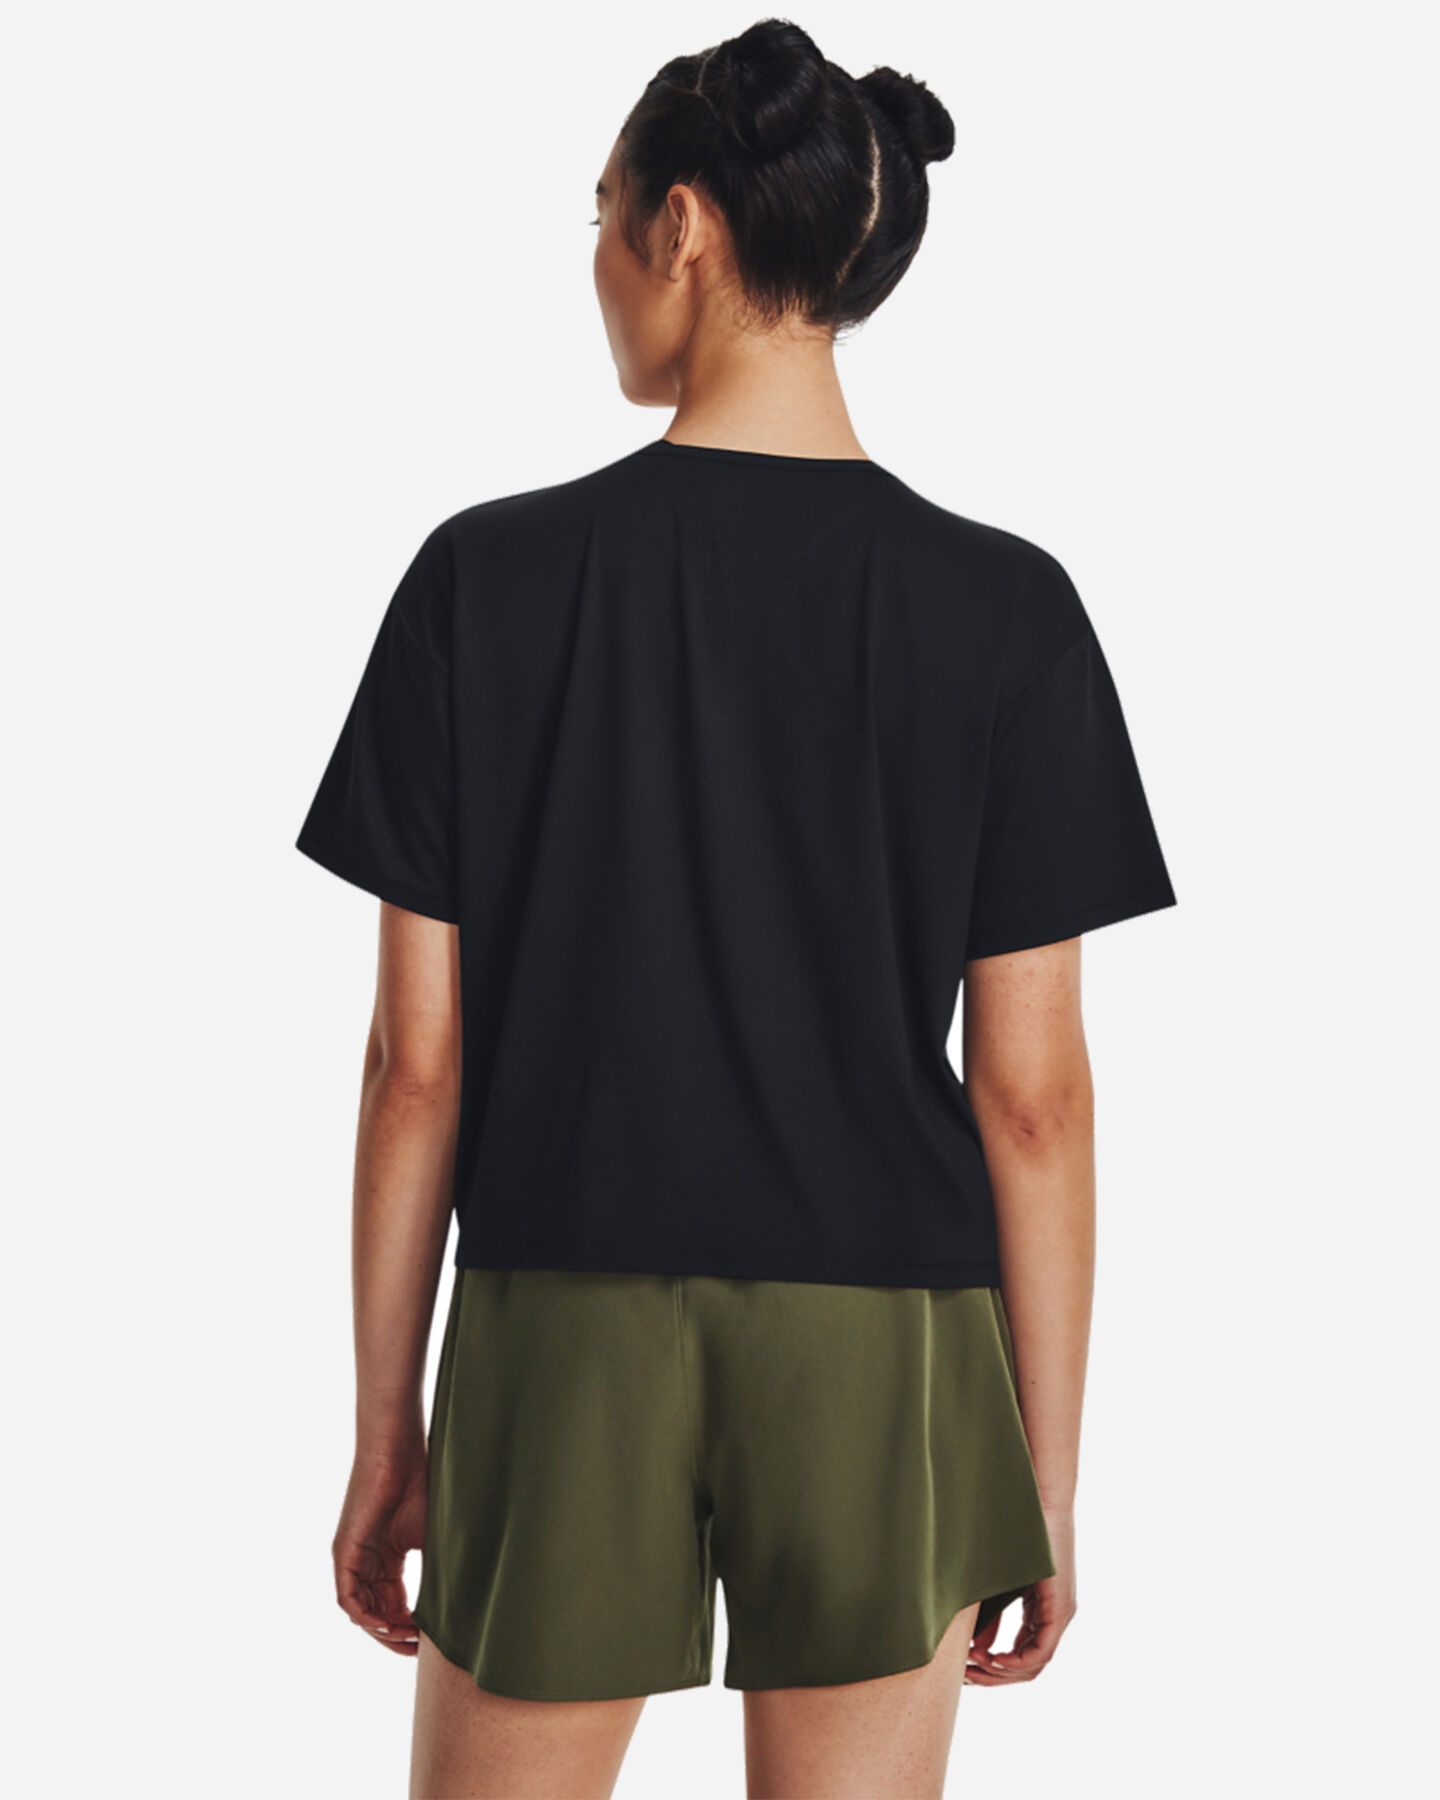  T-Shirt training UNDER ARMOUR MOTION W S5579312|0001|XS scatto 1